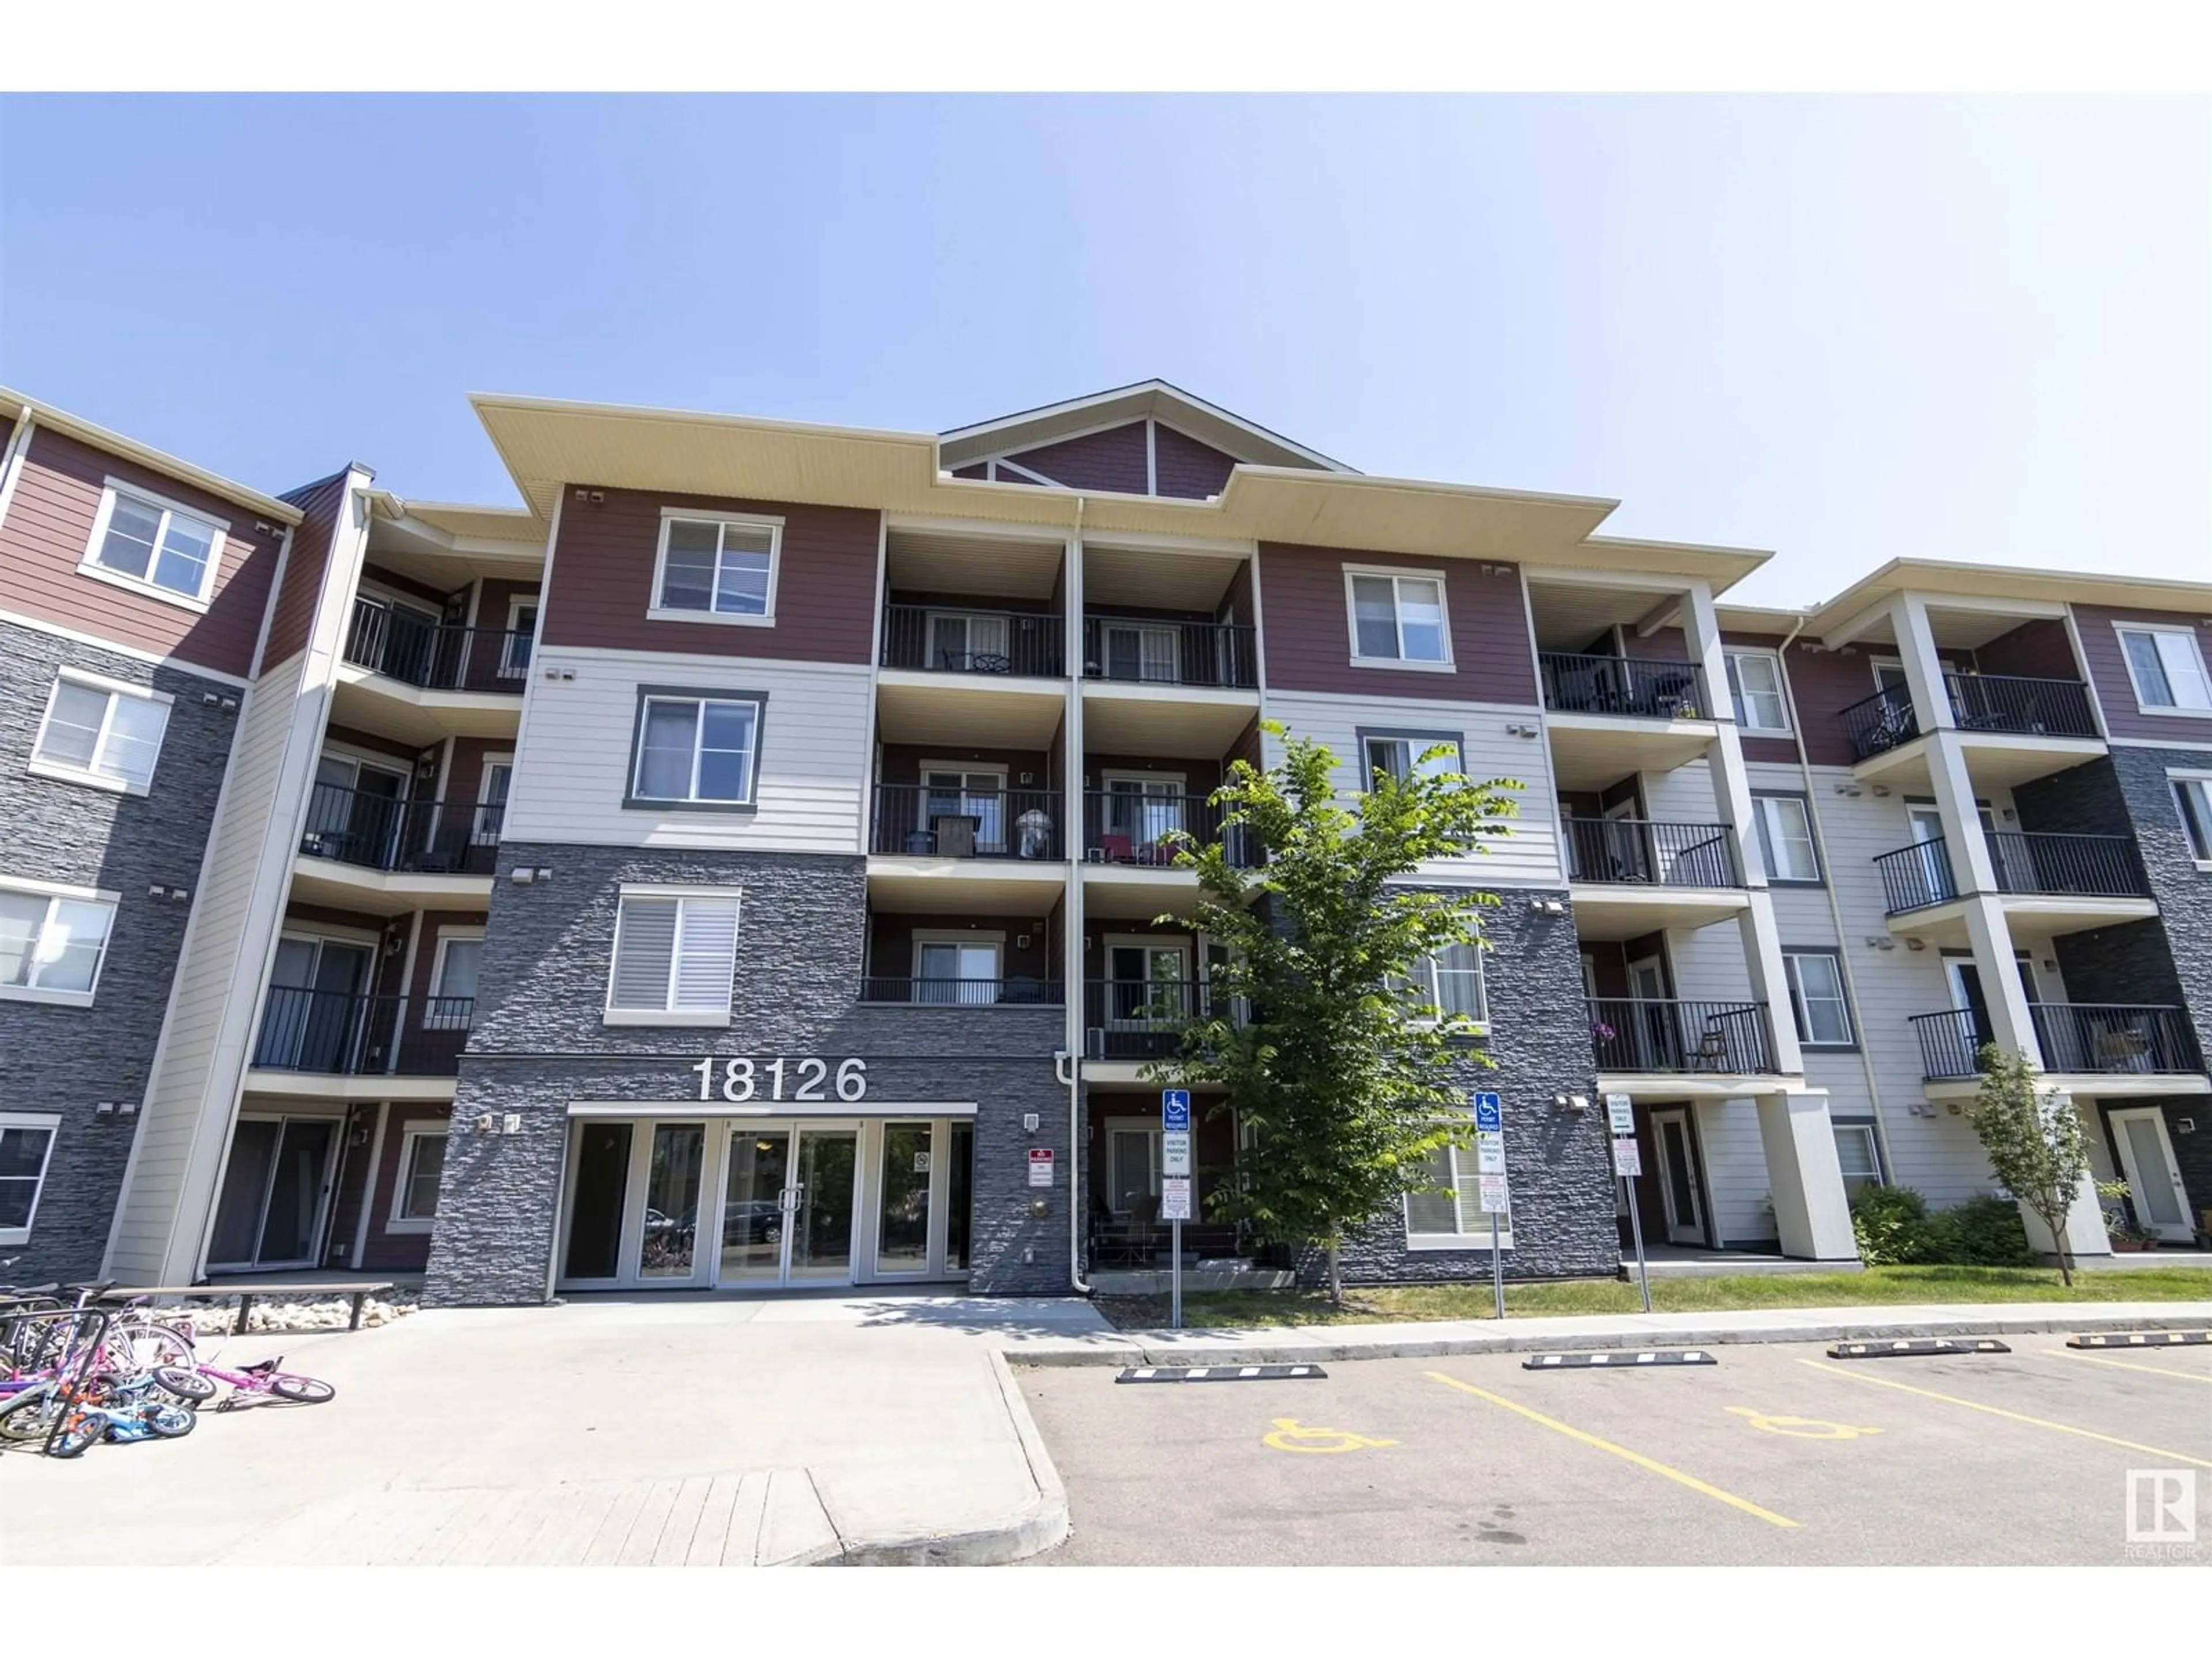 A pic from exterior of the house or condo for #411 18126 77 ST NW, Edmonton Alberta T5Z0N7